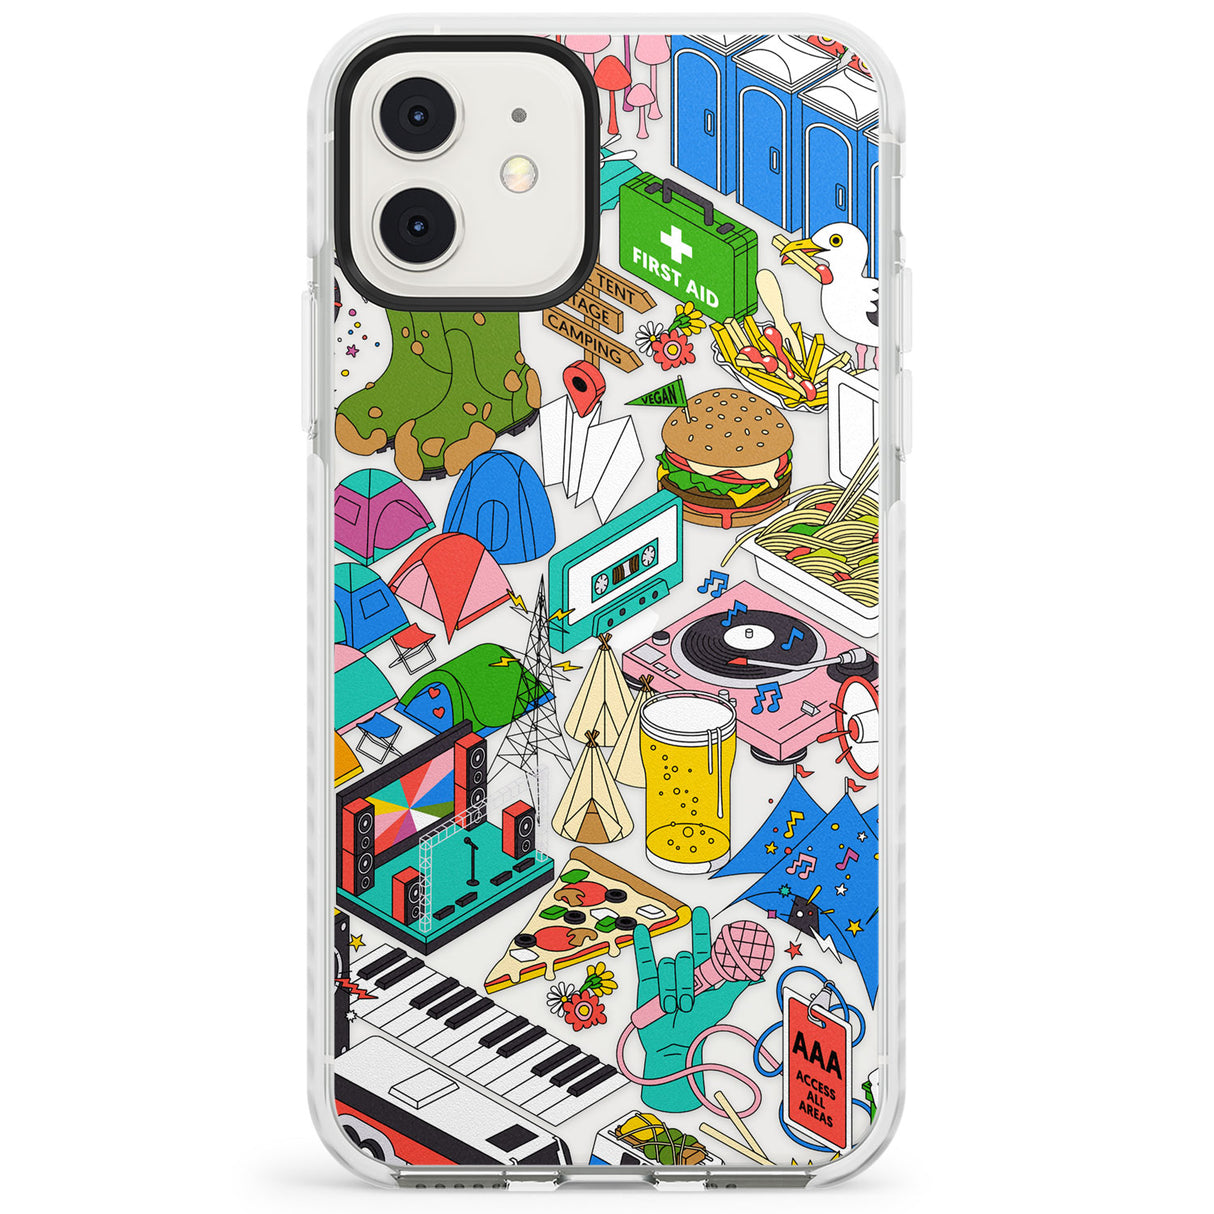 Festival Frenzy Impact Phone Case for iPhone 11, iphone 12